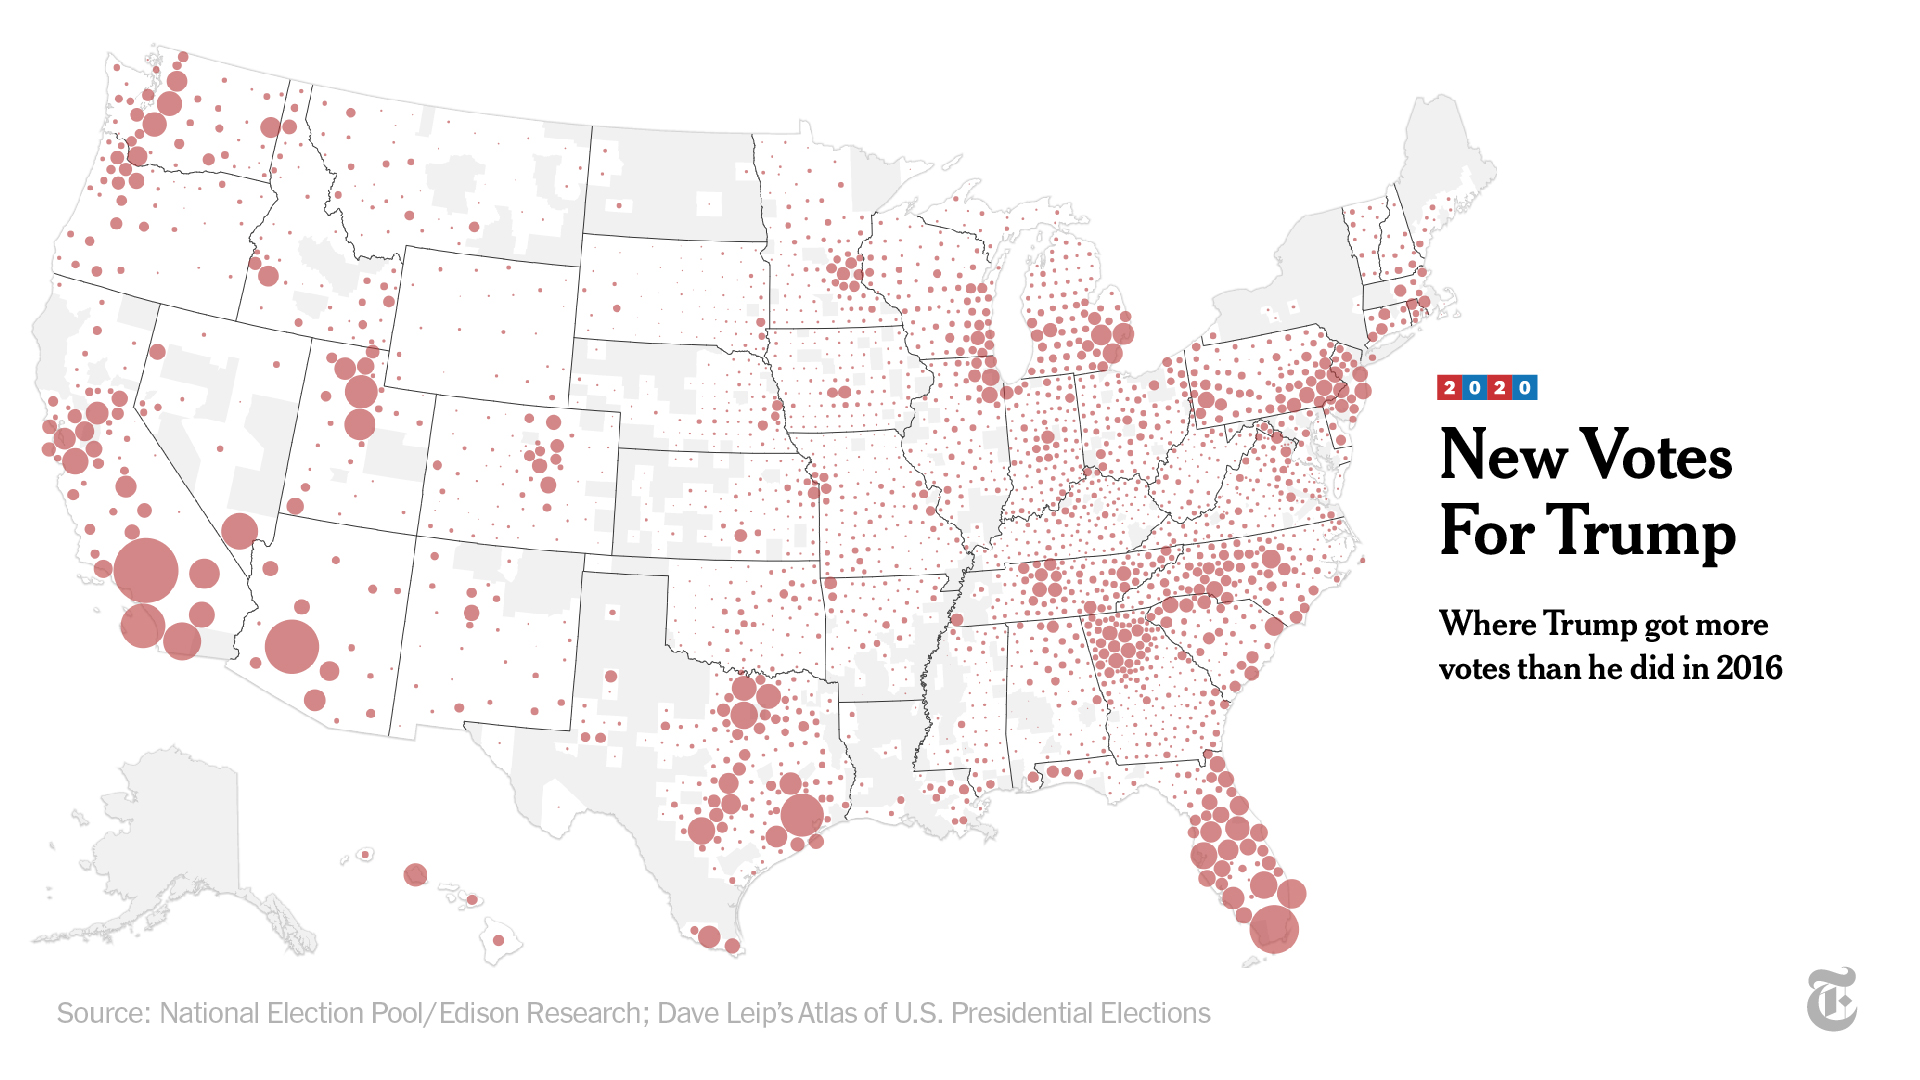 a chart showing the states where Donald Trump got more election votes in 2020 than 2016 : New Votes For Trump